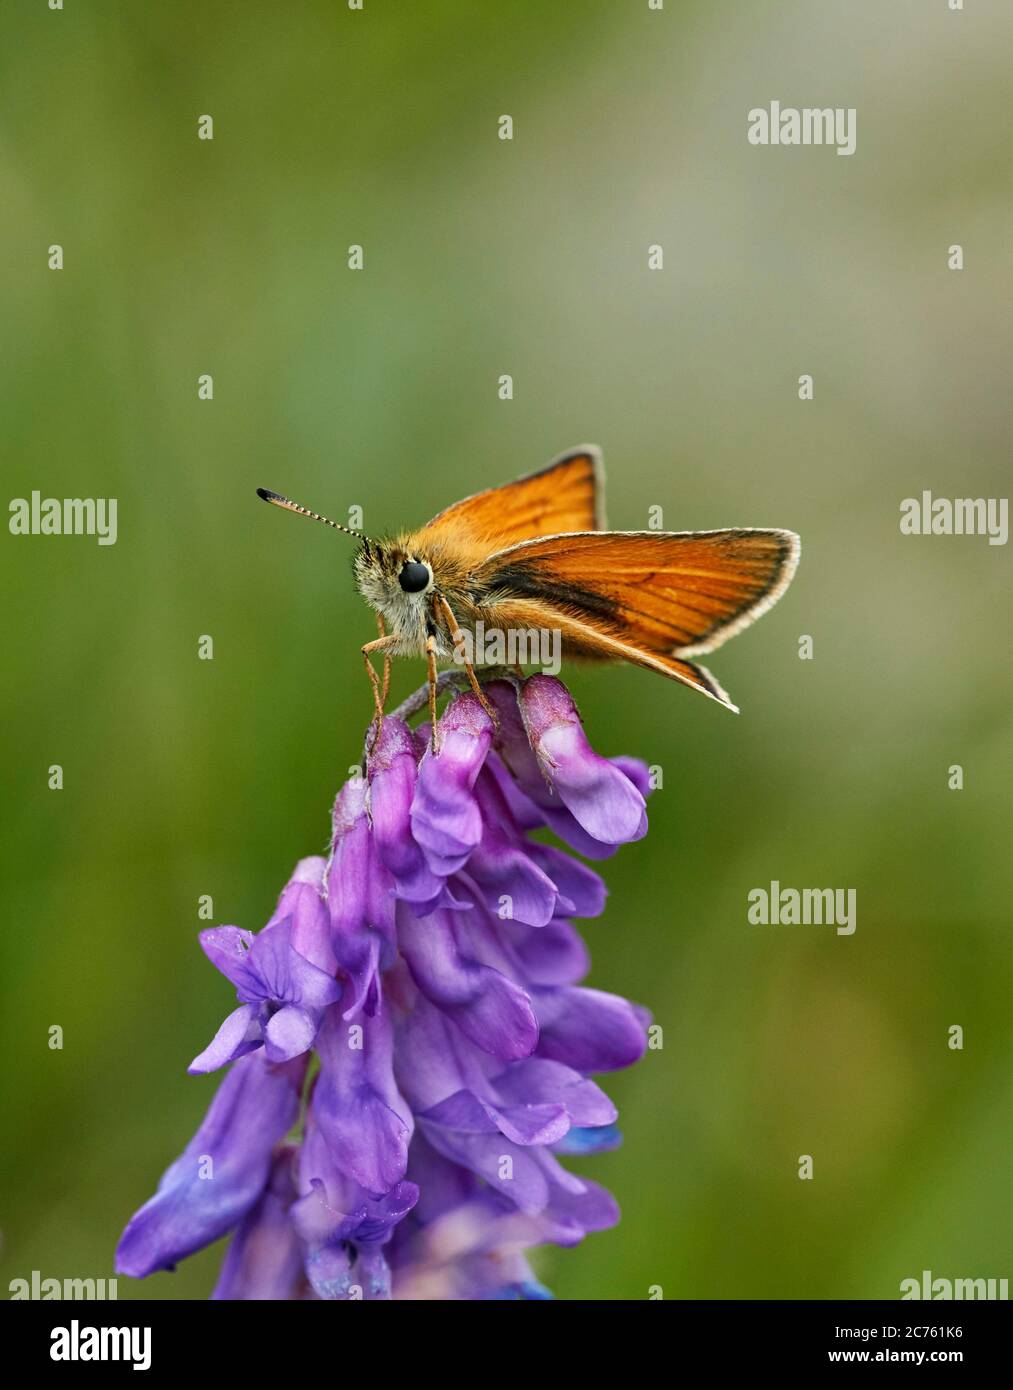 Essex Skipper perched on Tufted Vetch flower. Hurst Meadows, East Molesey, Surrey, England. Stock Photo